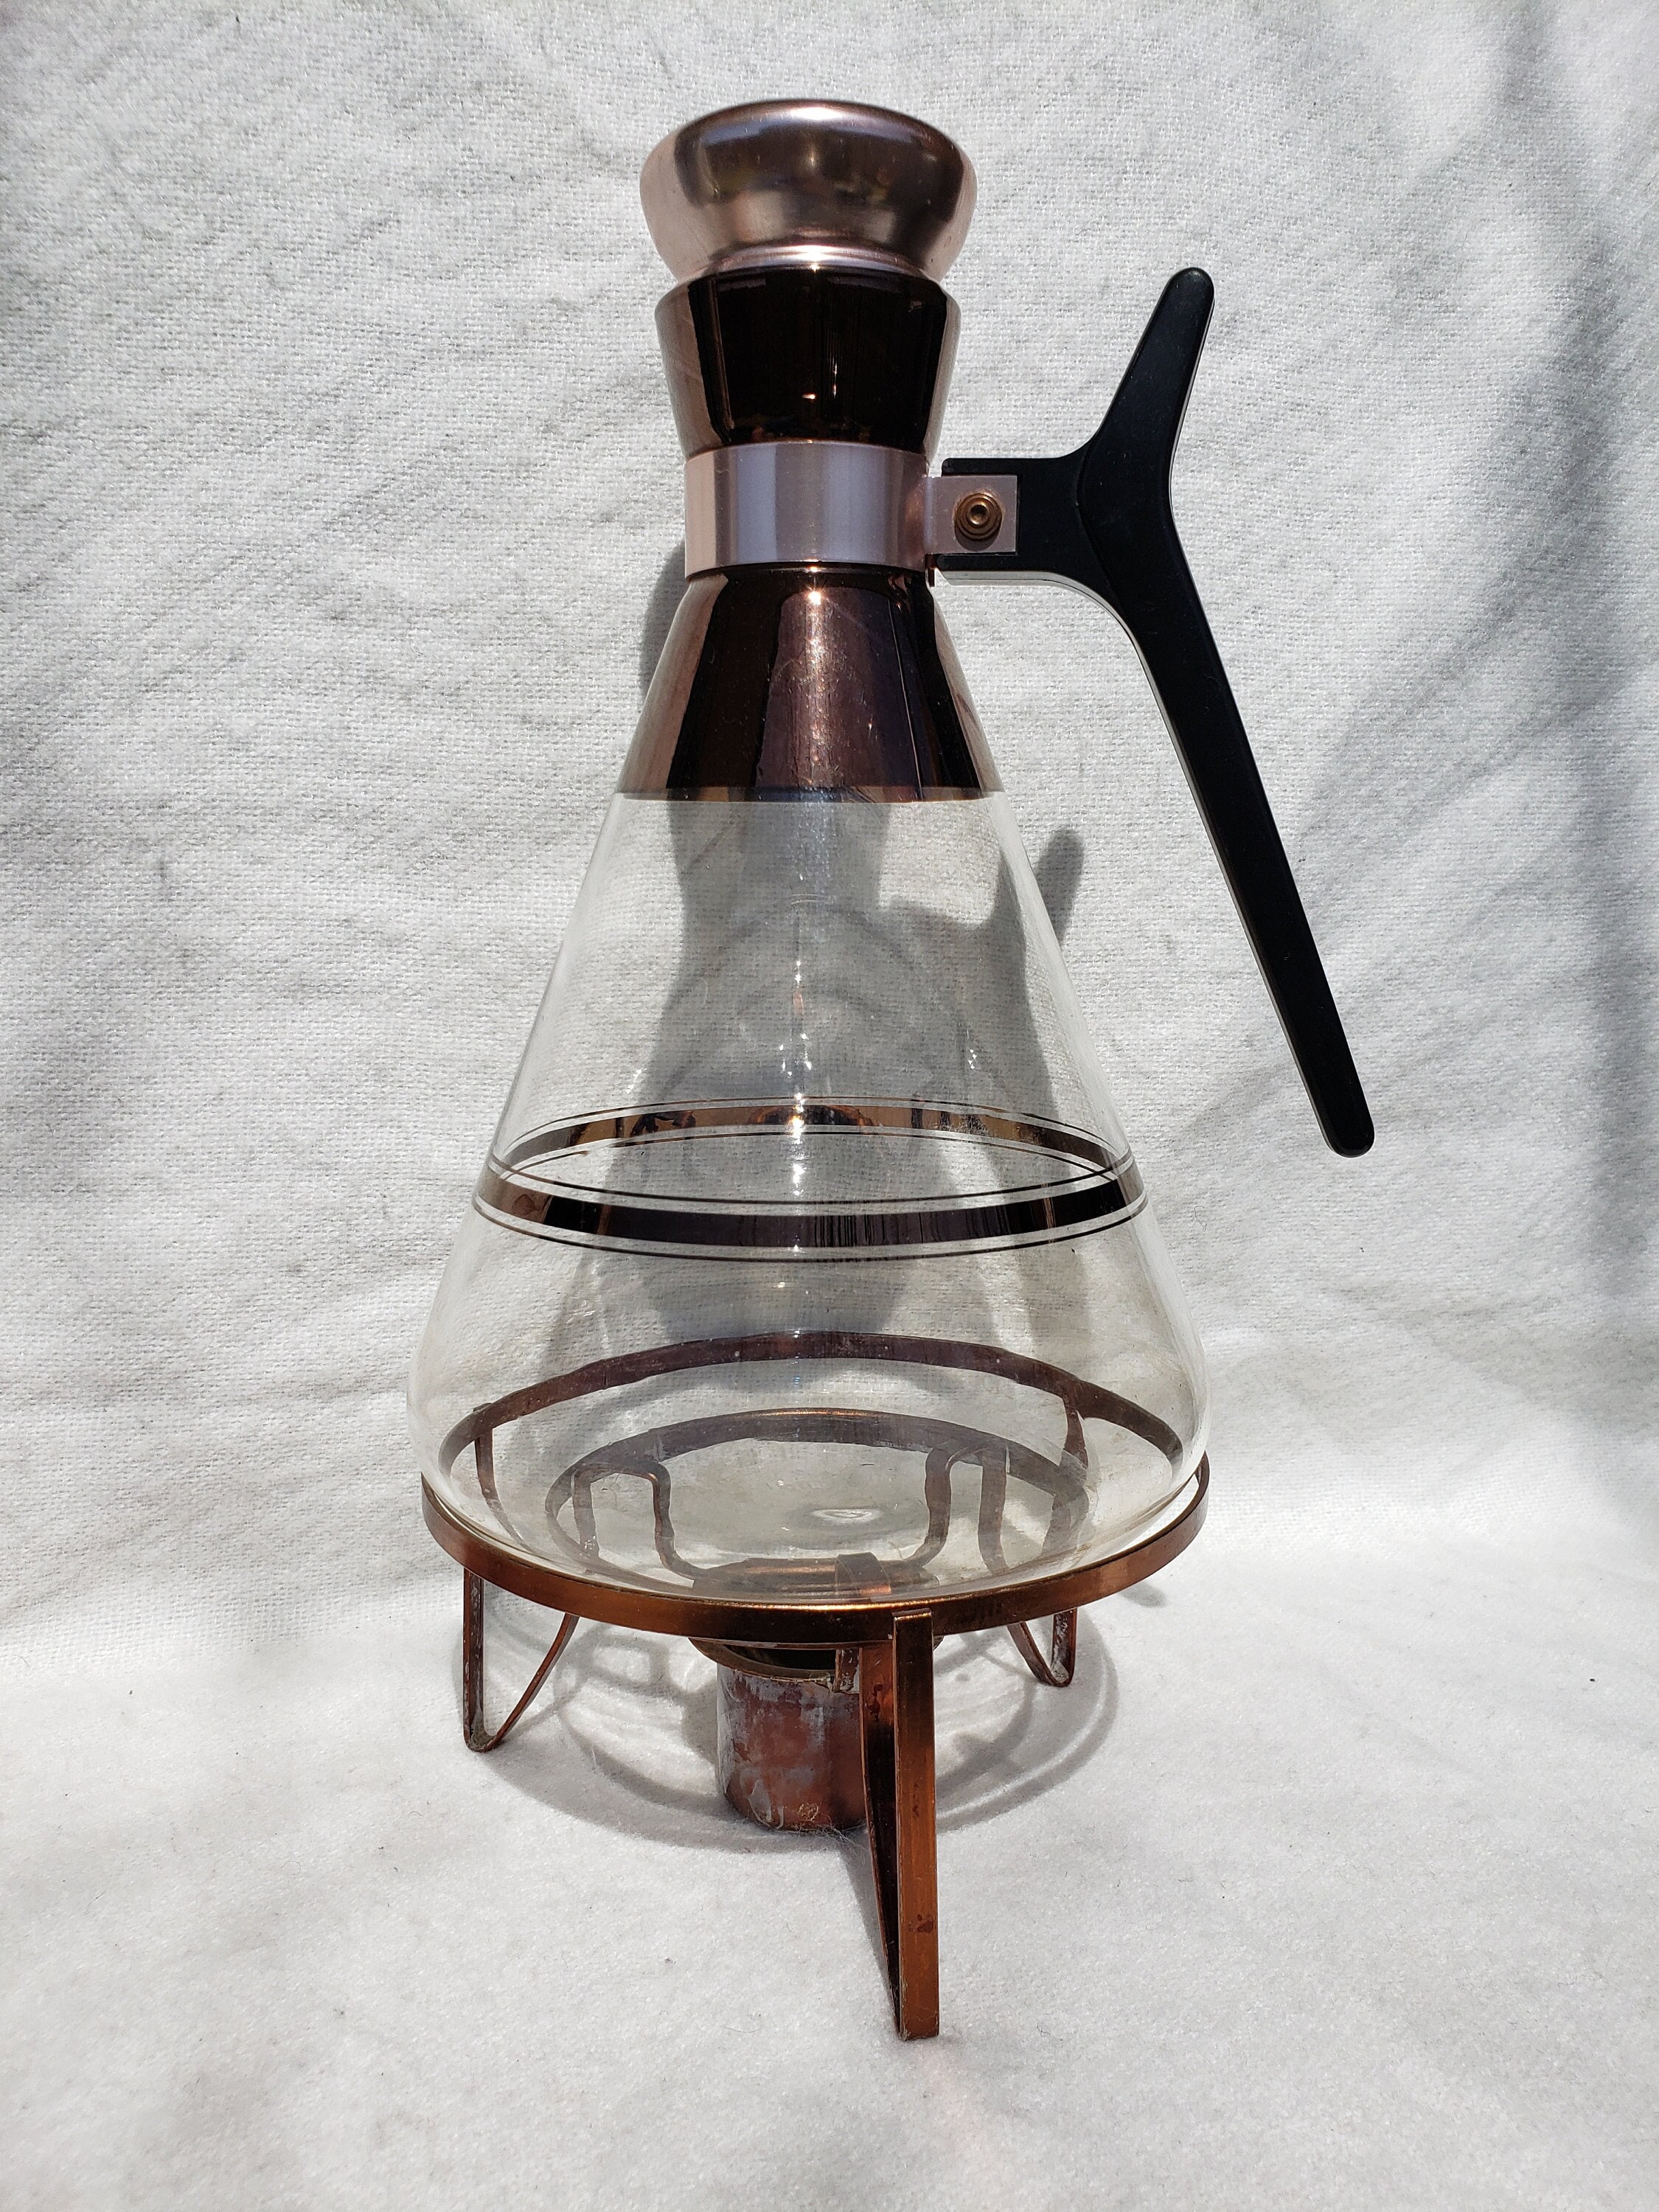 Java Jr. Mini Coffee Creamer Decanter: Styled after iconic diner coffee pots